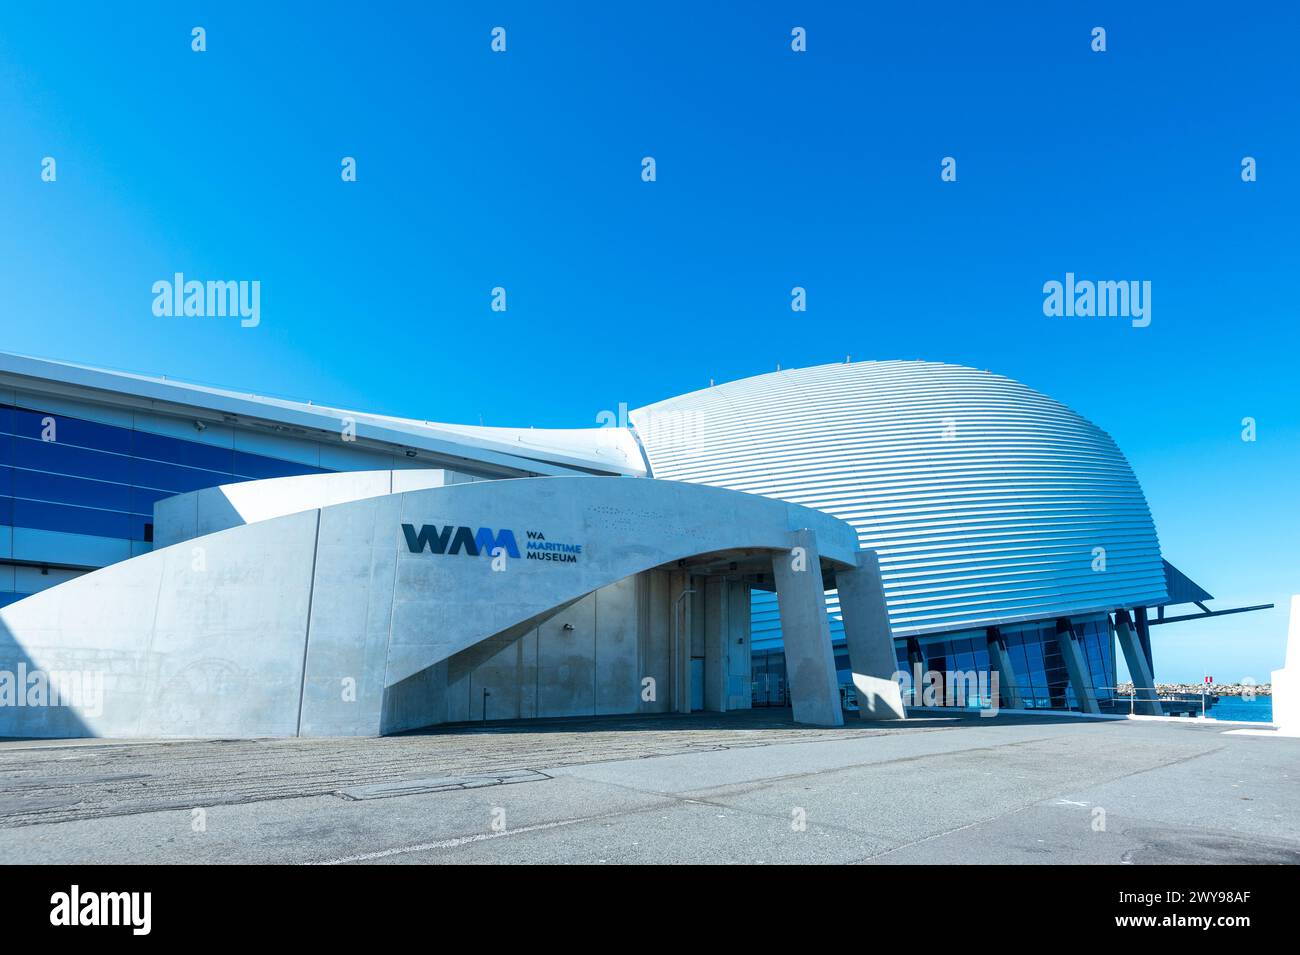 View of the WA Maritime Museum and its modern architecture in the port of Fremantle, Western Australia, WA, Australia Stock Photo